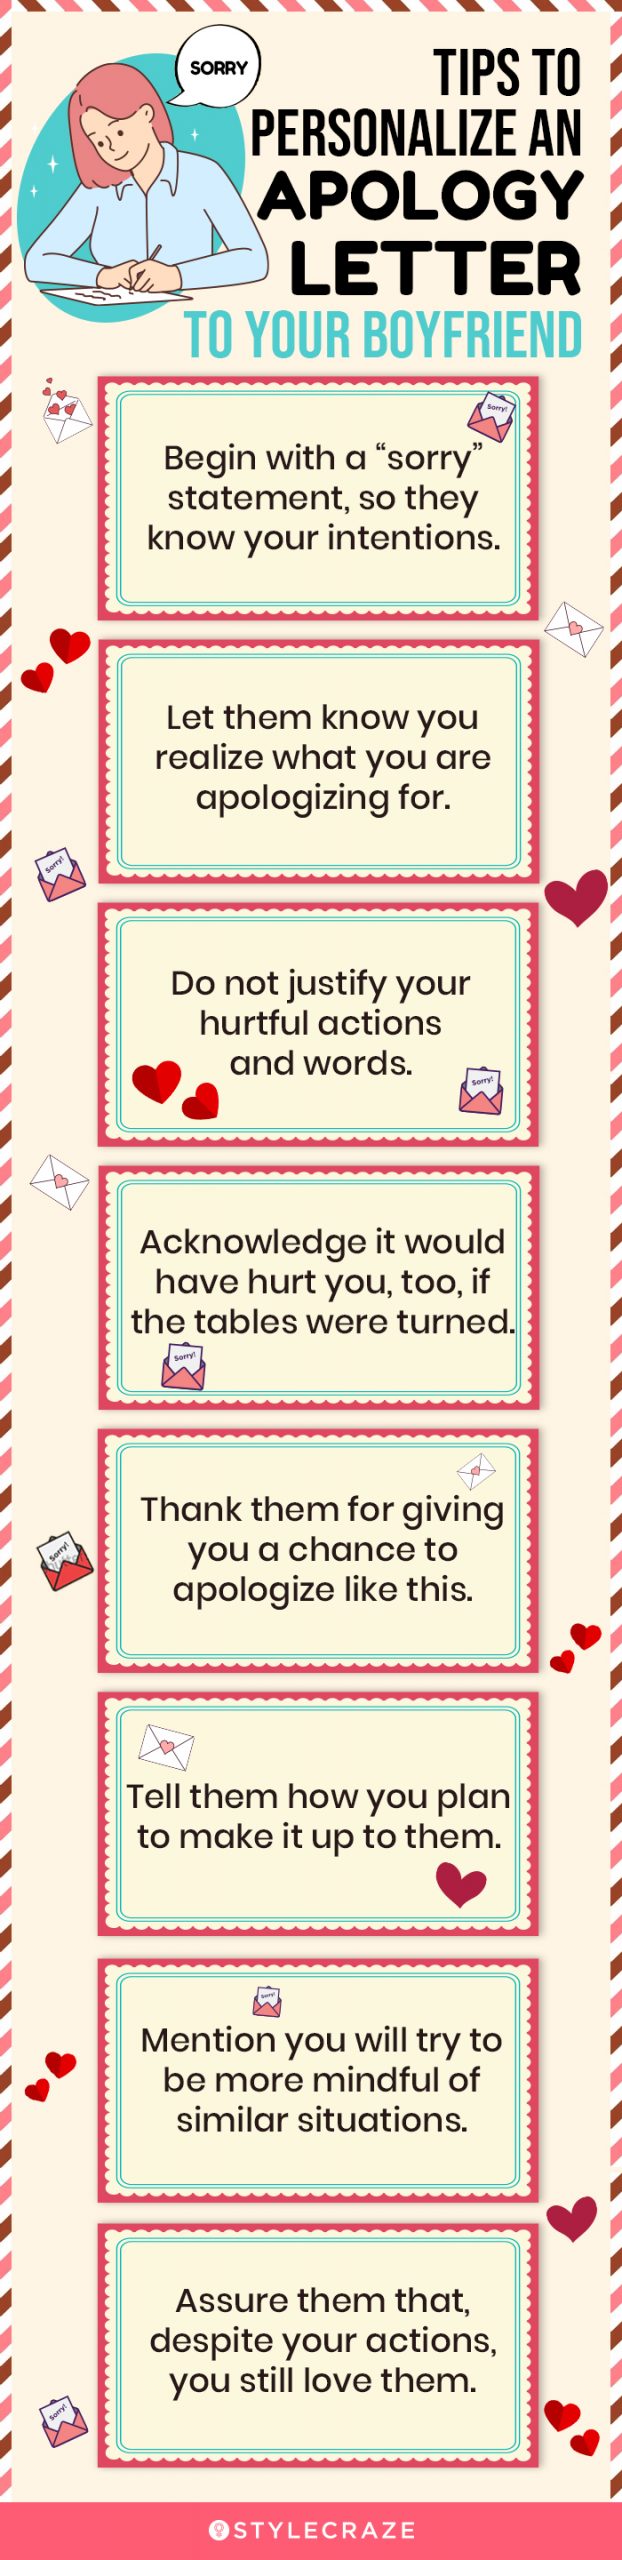 tips to personalize an apology letter to your boyfriend [infographic]